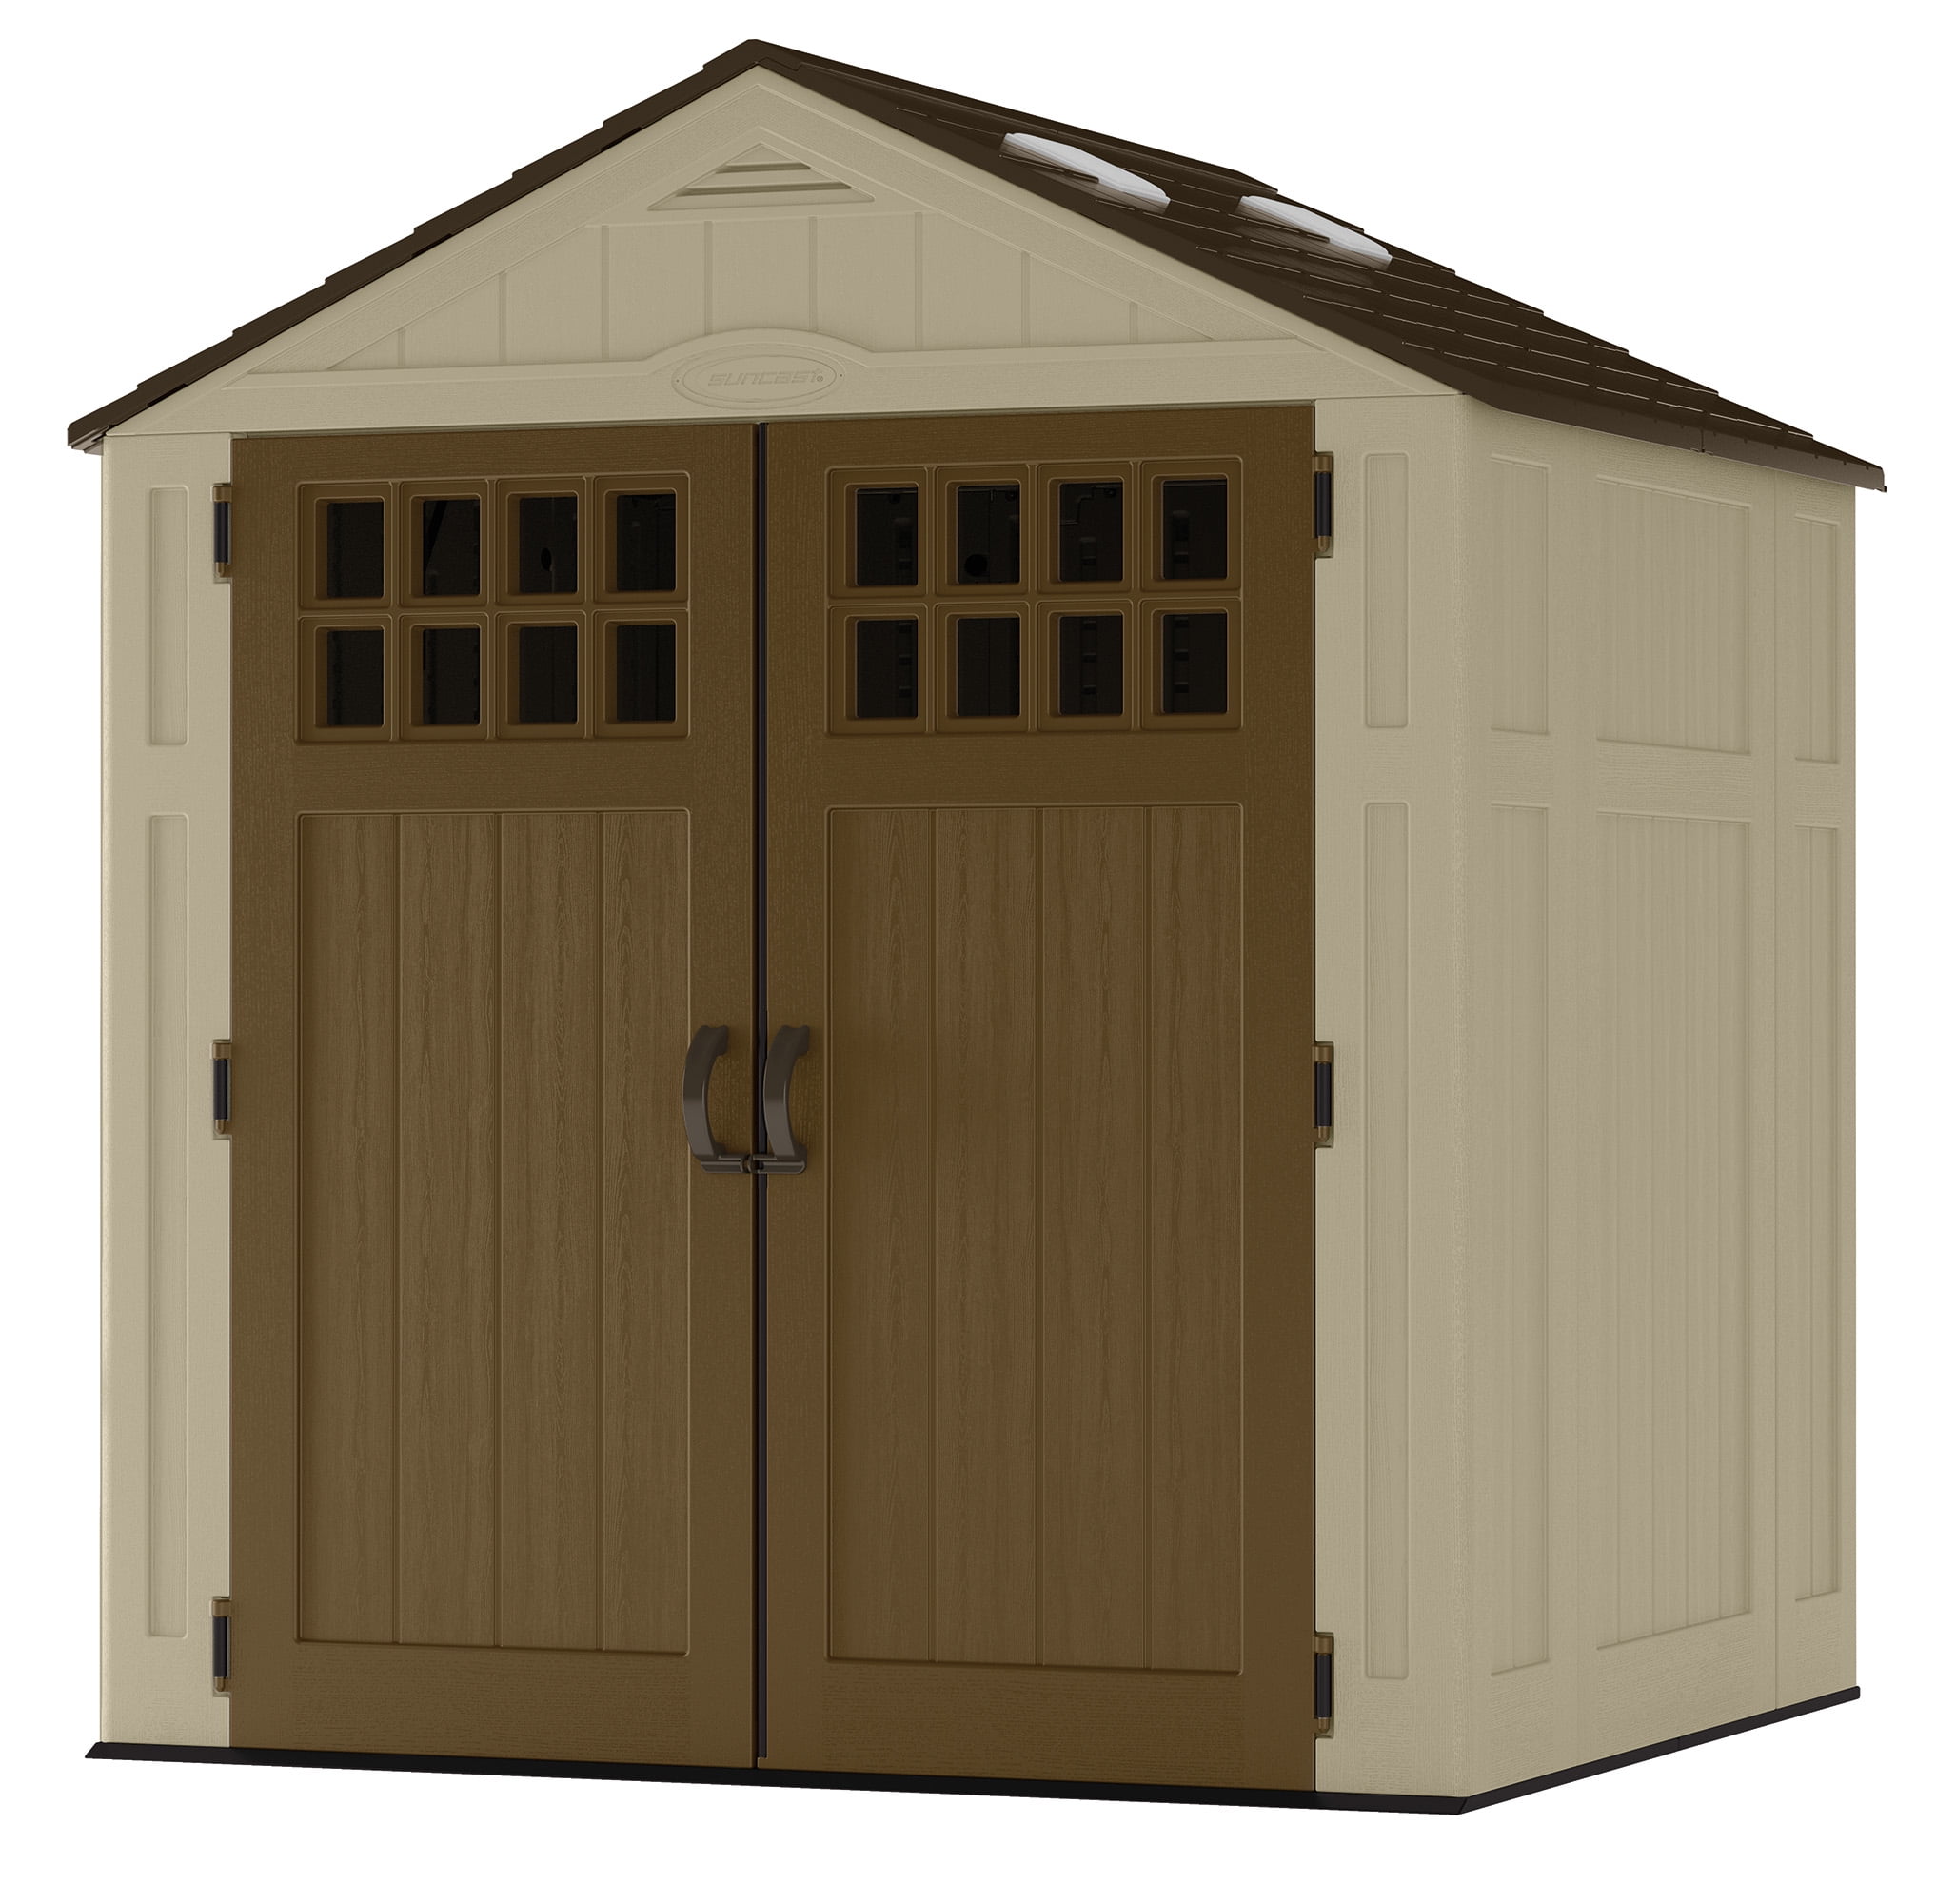 Suncast 6' x 5' Outdoor Everett Storage Shed with Windows, Sand B...